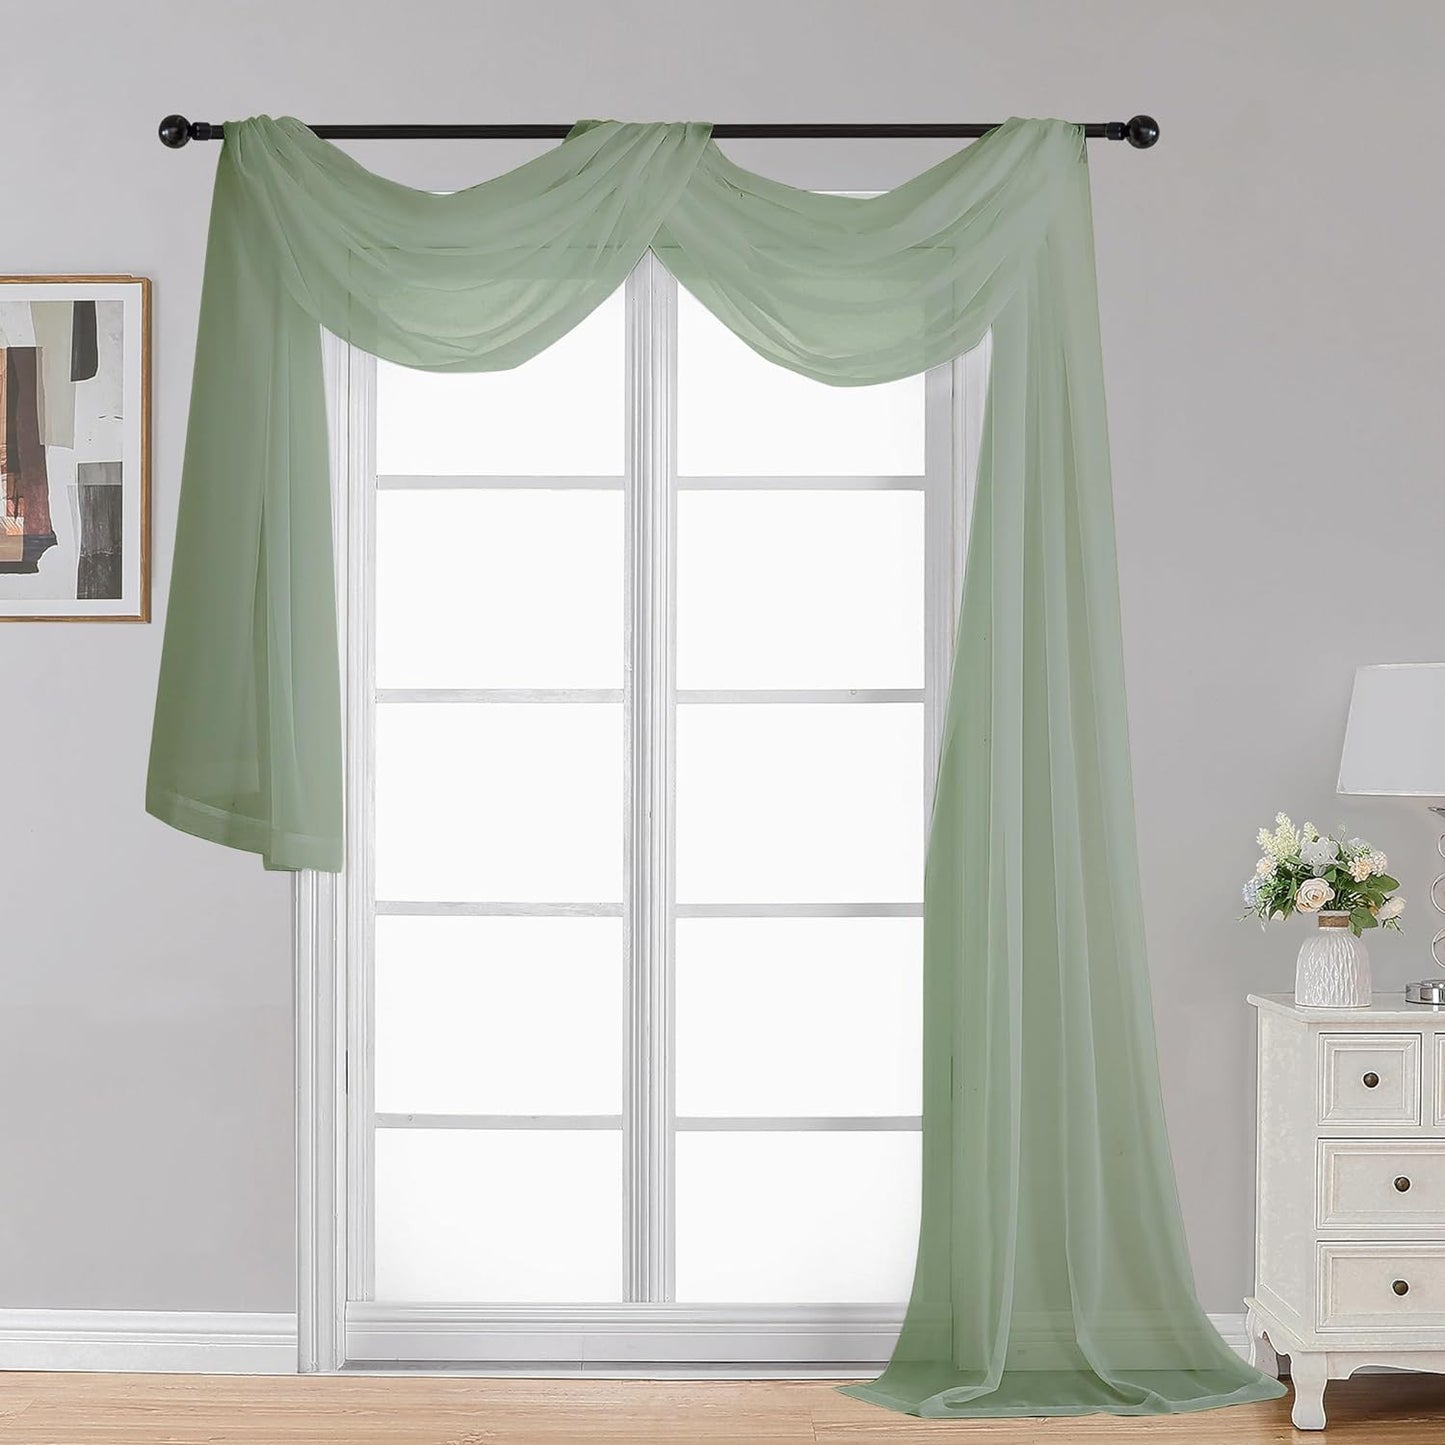 OWENIE White Sheer Valance for Window, Small Short Rod Pocket Voile Valance Curtain Window Treatment Decor for Living Room Bathroom Kitchen Cafe Laundry Basement, 60" W X 14" L  OWENIE Sage Green 42W X 216L 